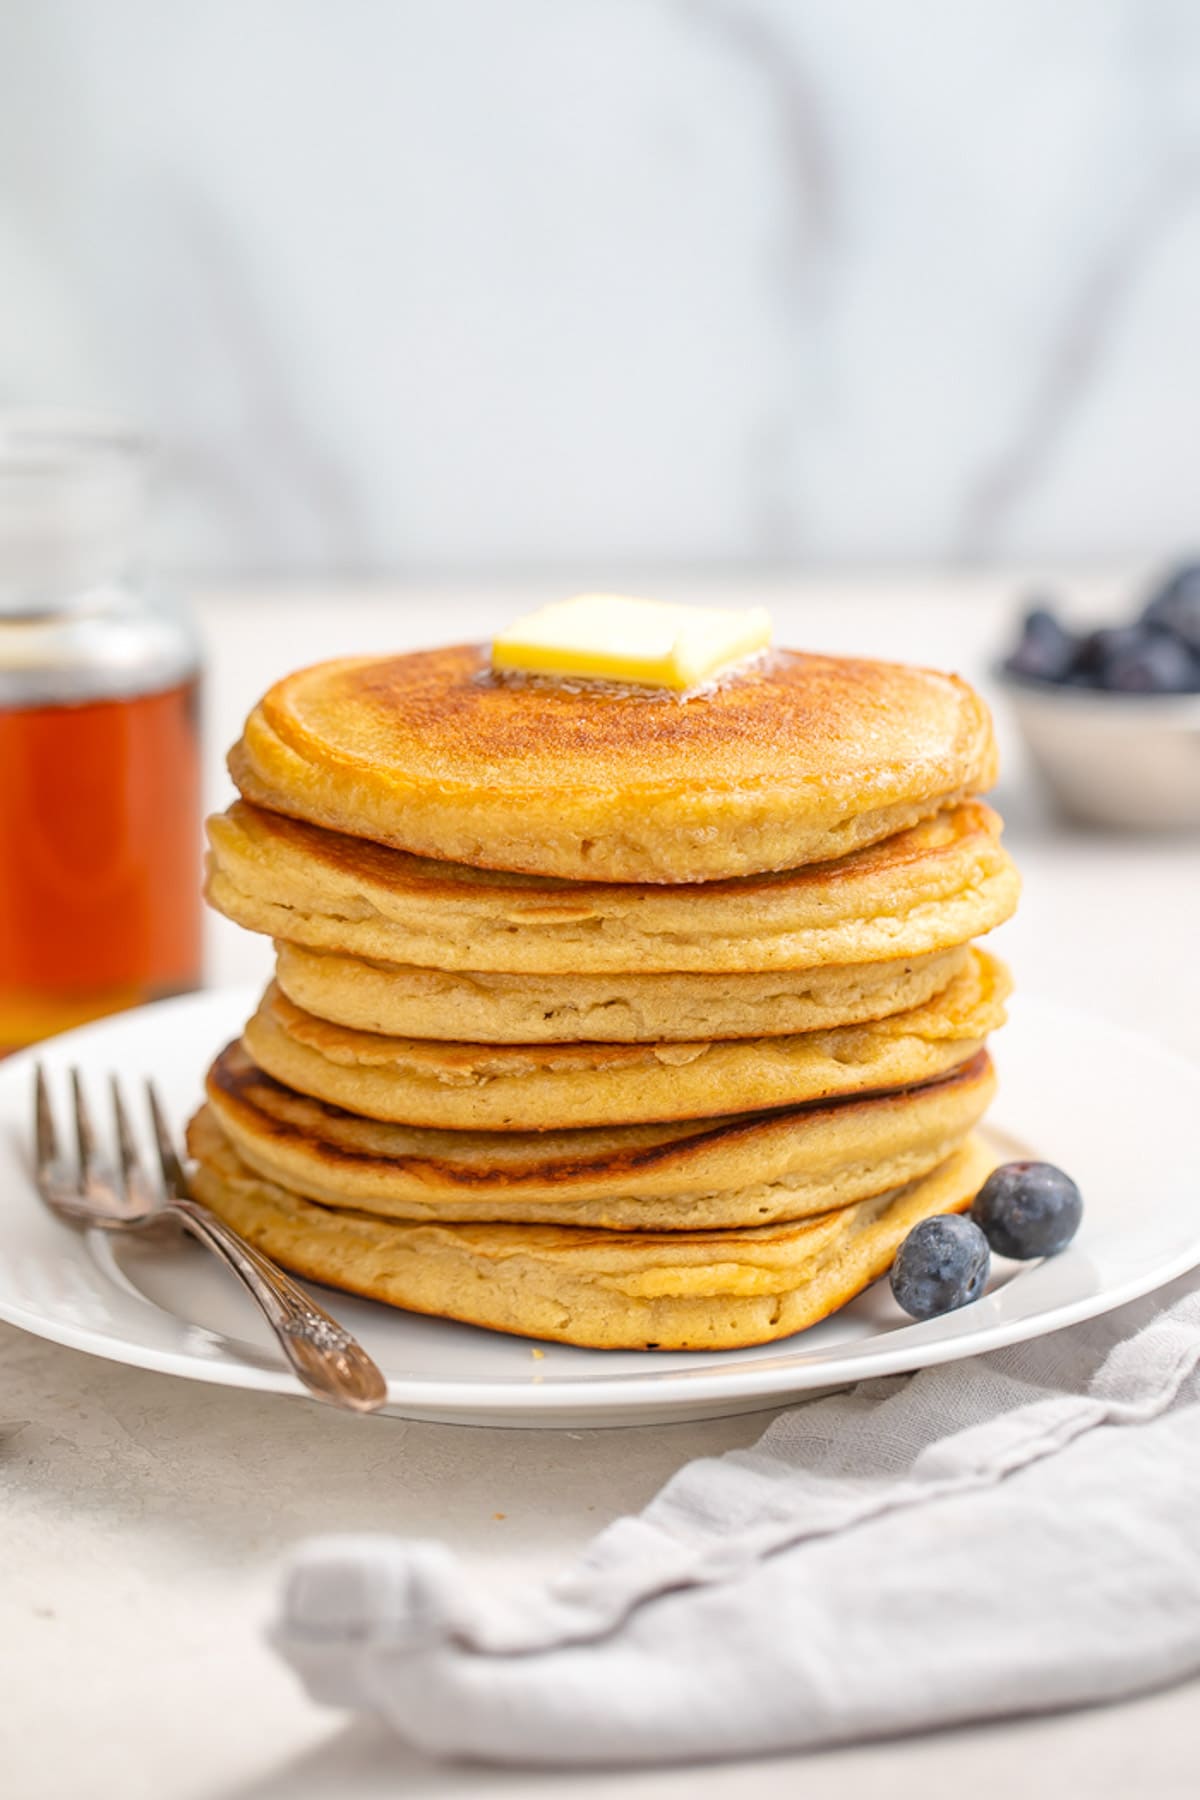 A stack of 6 paleo pancakes resting on a plate next to 2 blueberries. A pat of butter sits atop the pancakes.